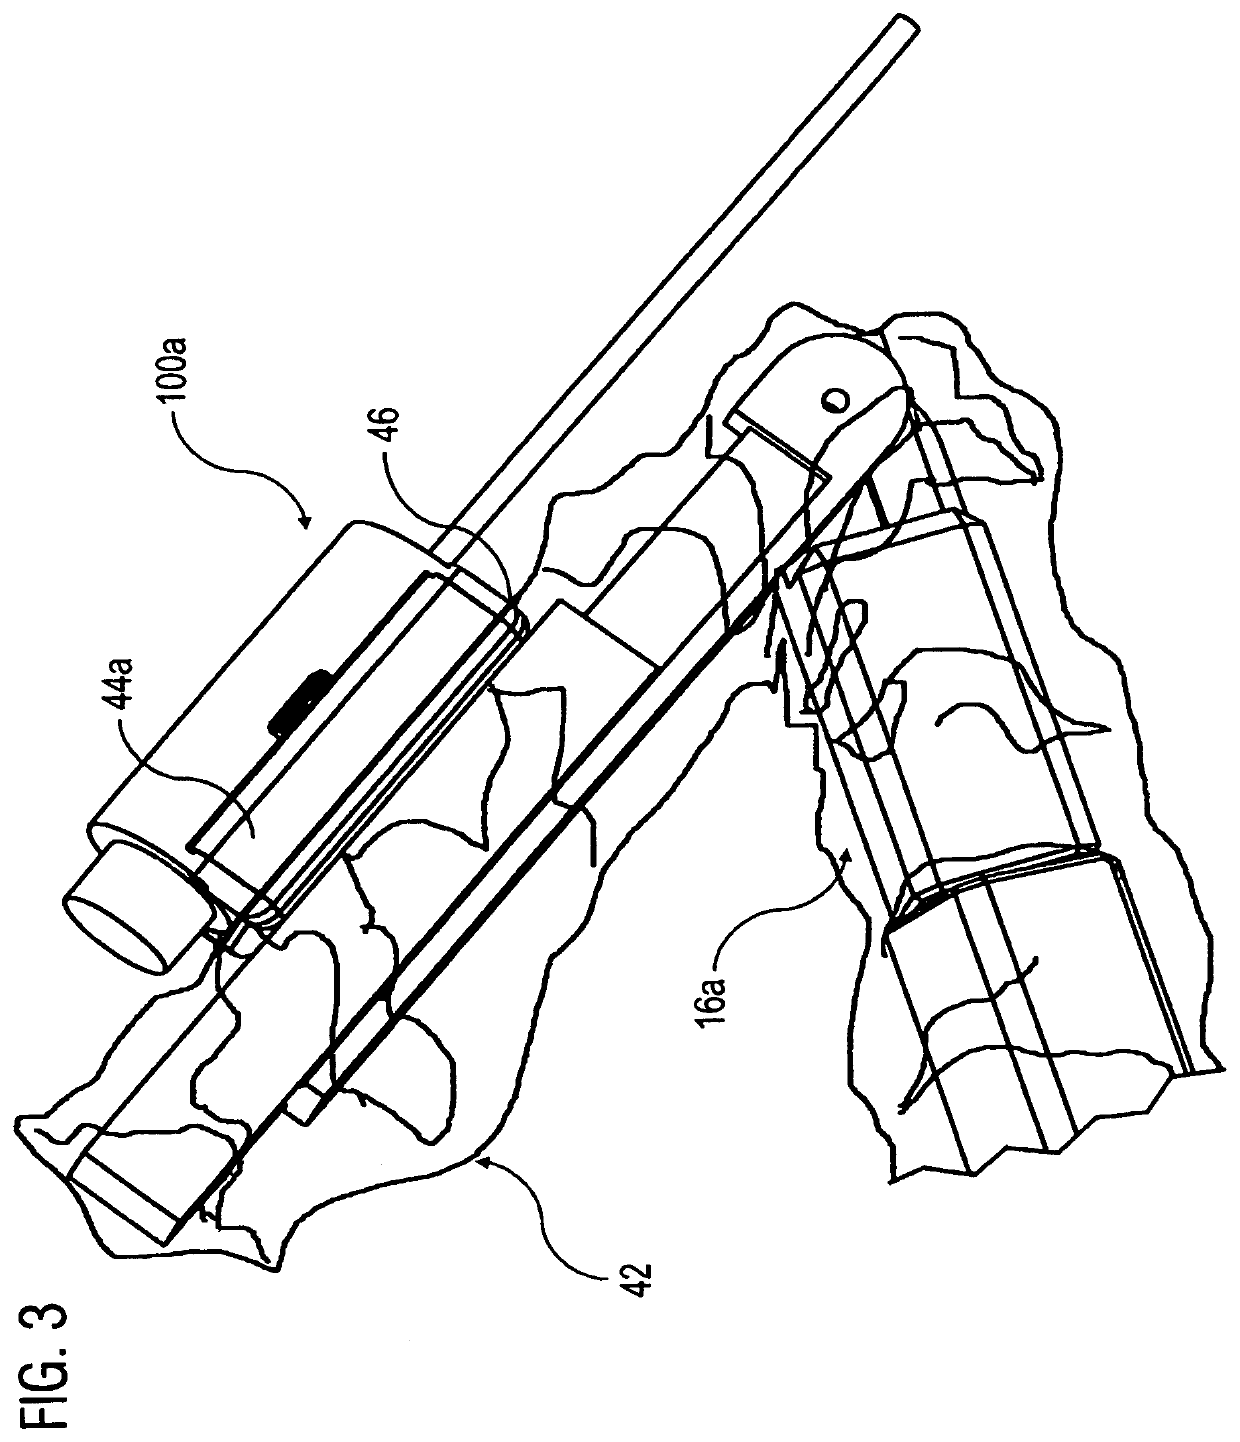 Device for robot-assisted surgery